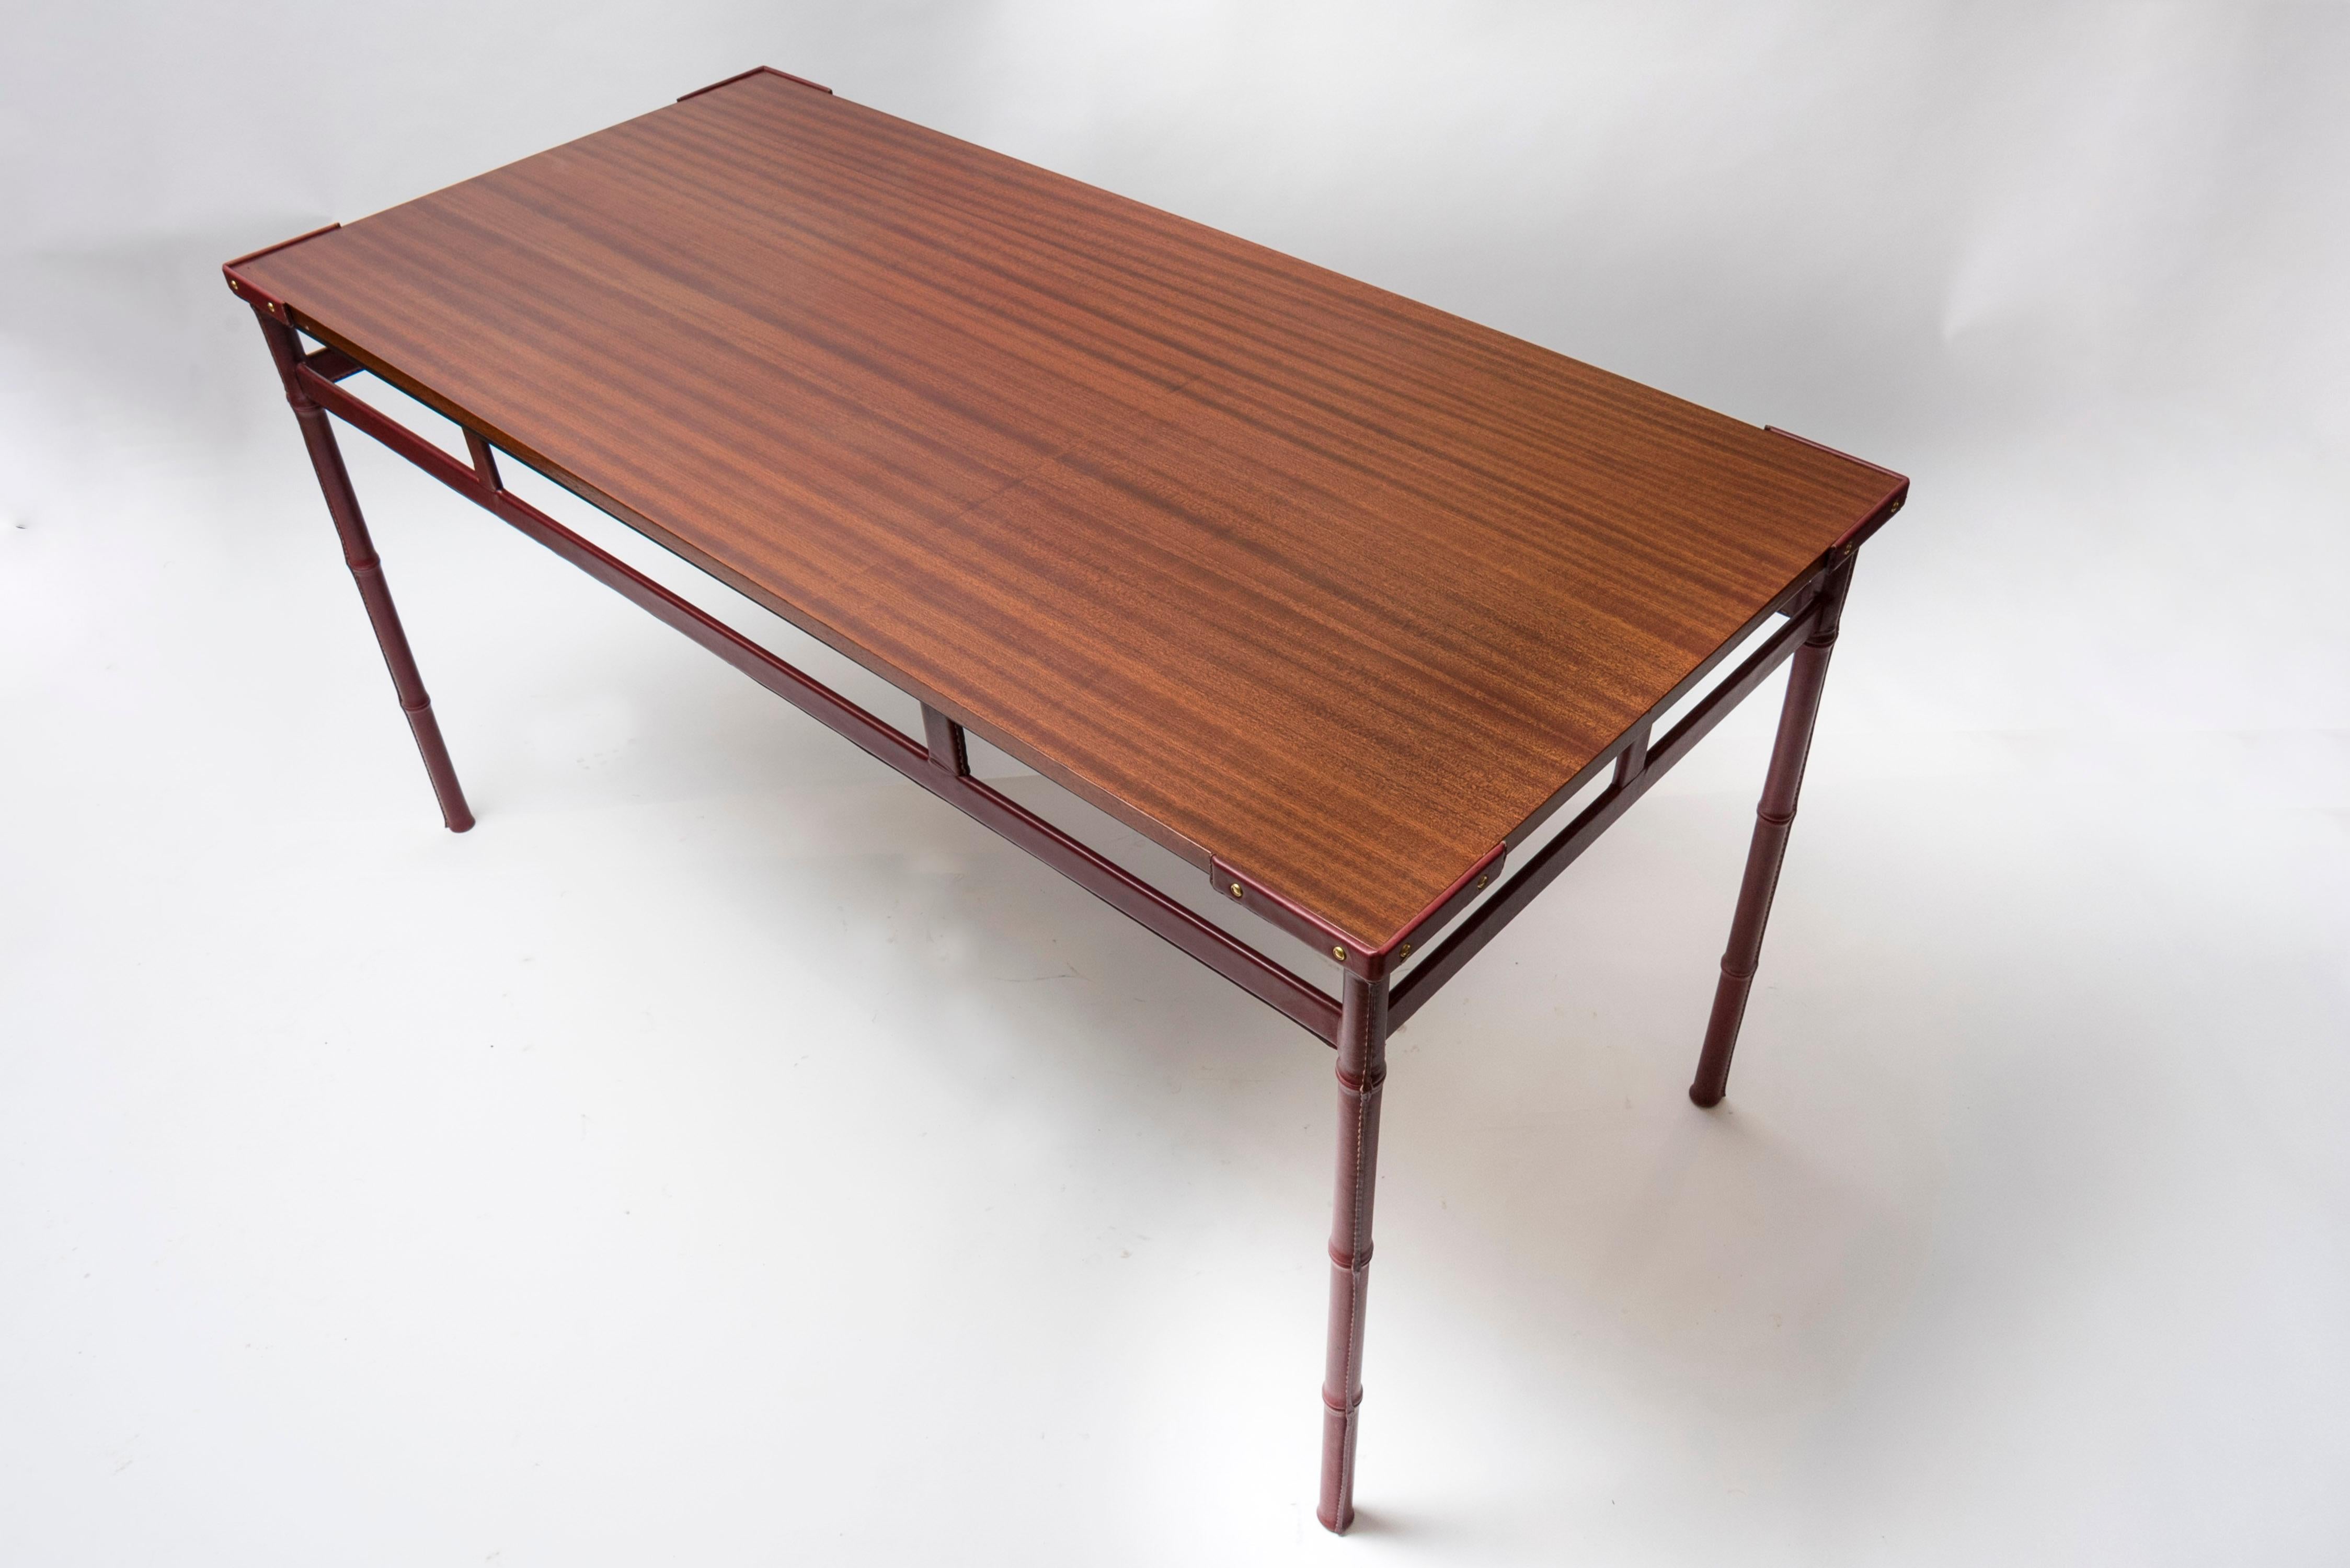 1950's Stitched leather small diner table, or writing table by Jacques Adnet
Cow leather and tainted pearwood

